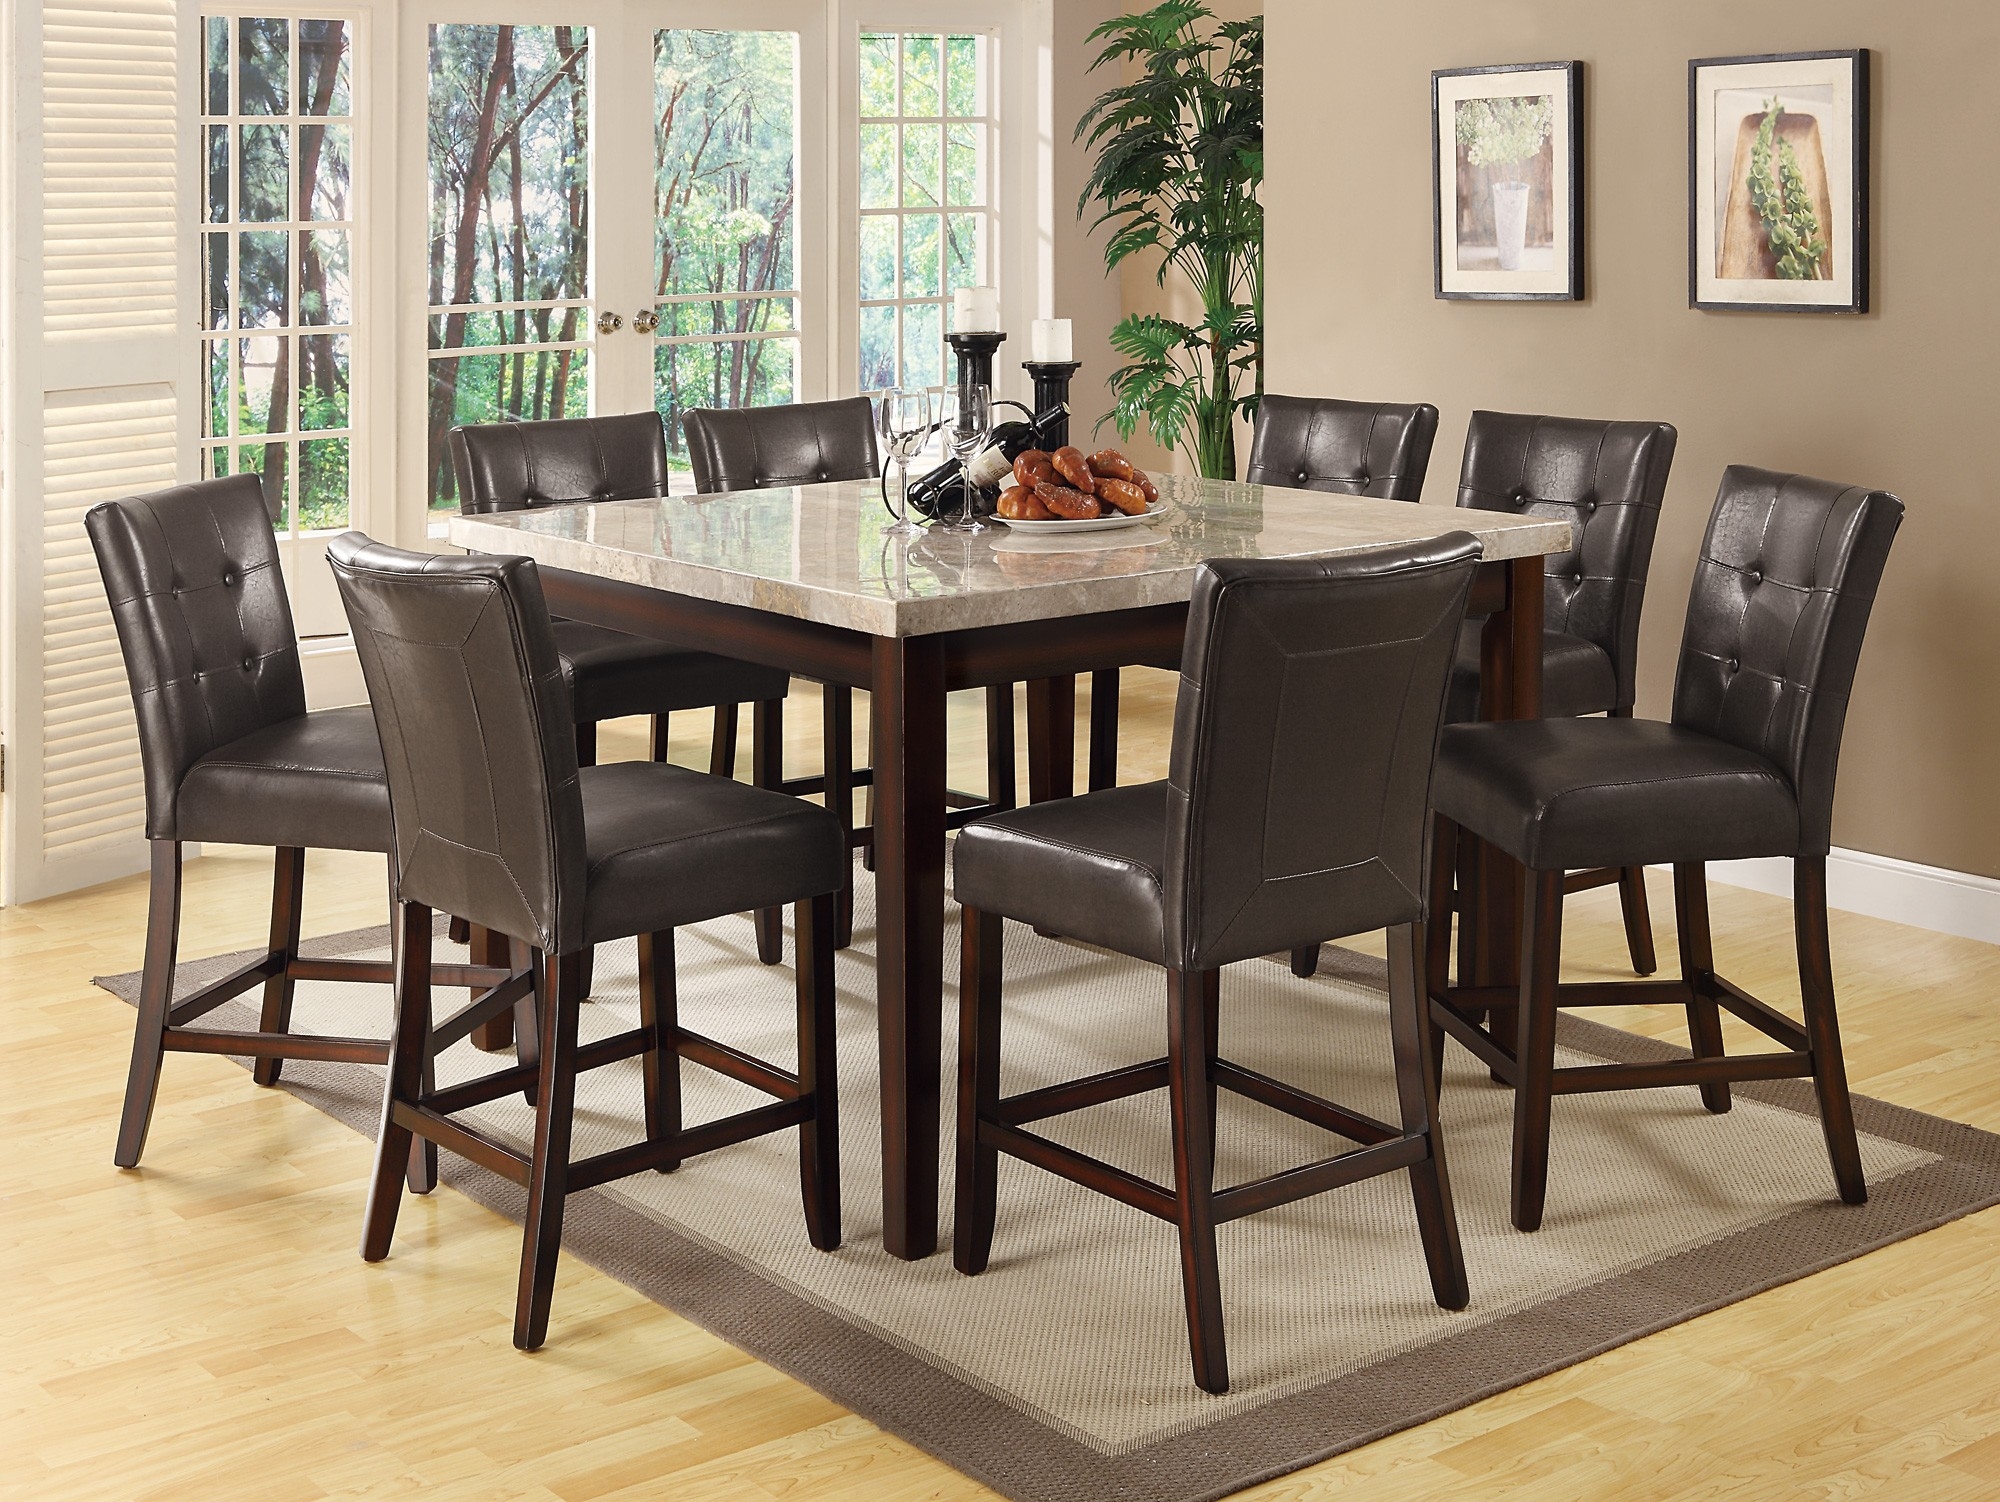 Marble top dining table set 28